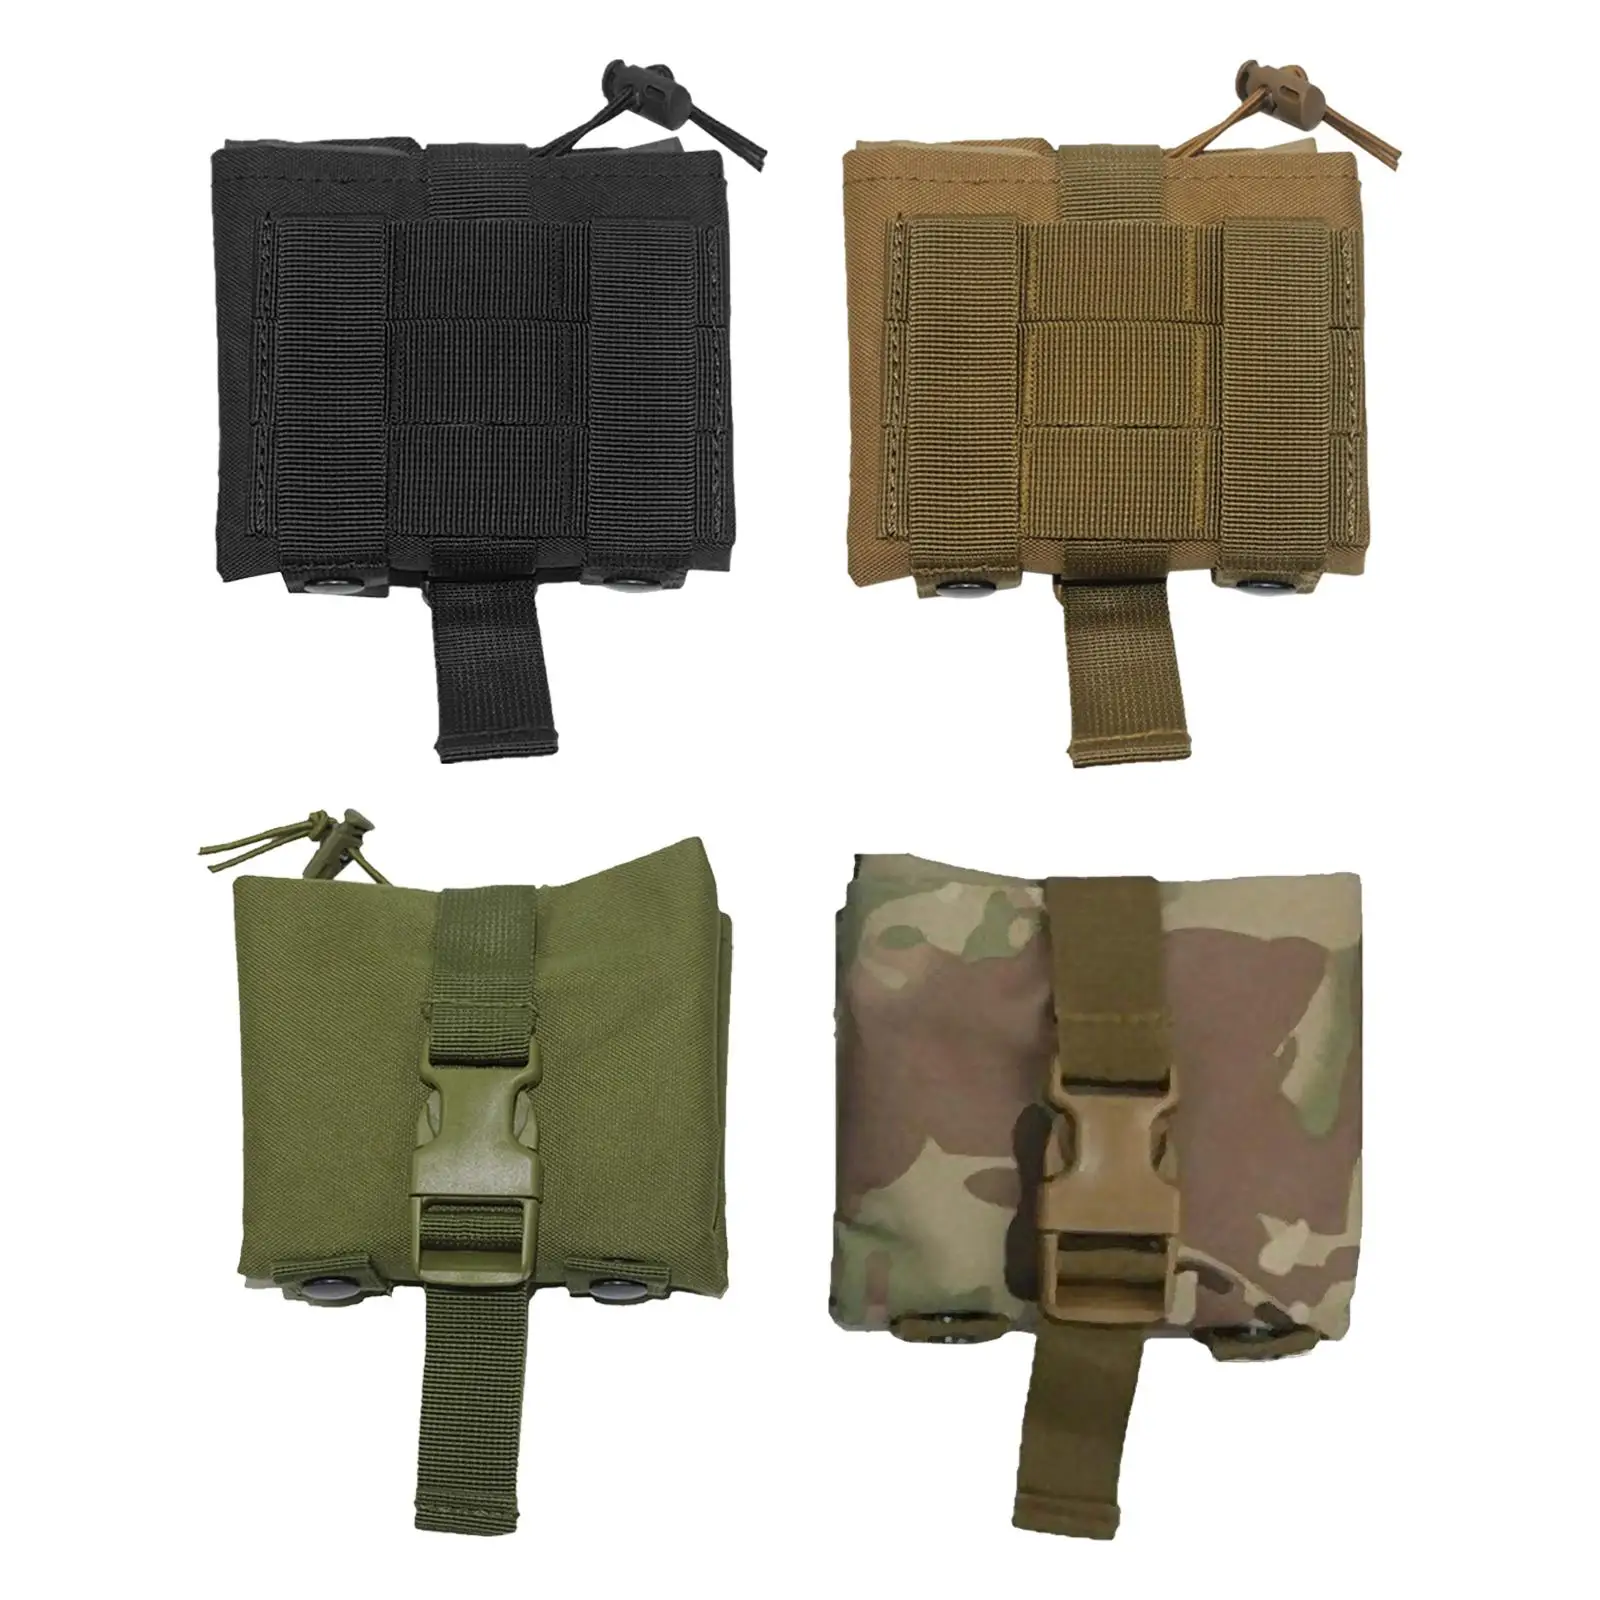 Multifunction Magazine Drop Pouch Collapsible Durable Attachments Drawstring Bag Adjustable Molle Dump Pouch for Camping Hunting